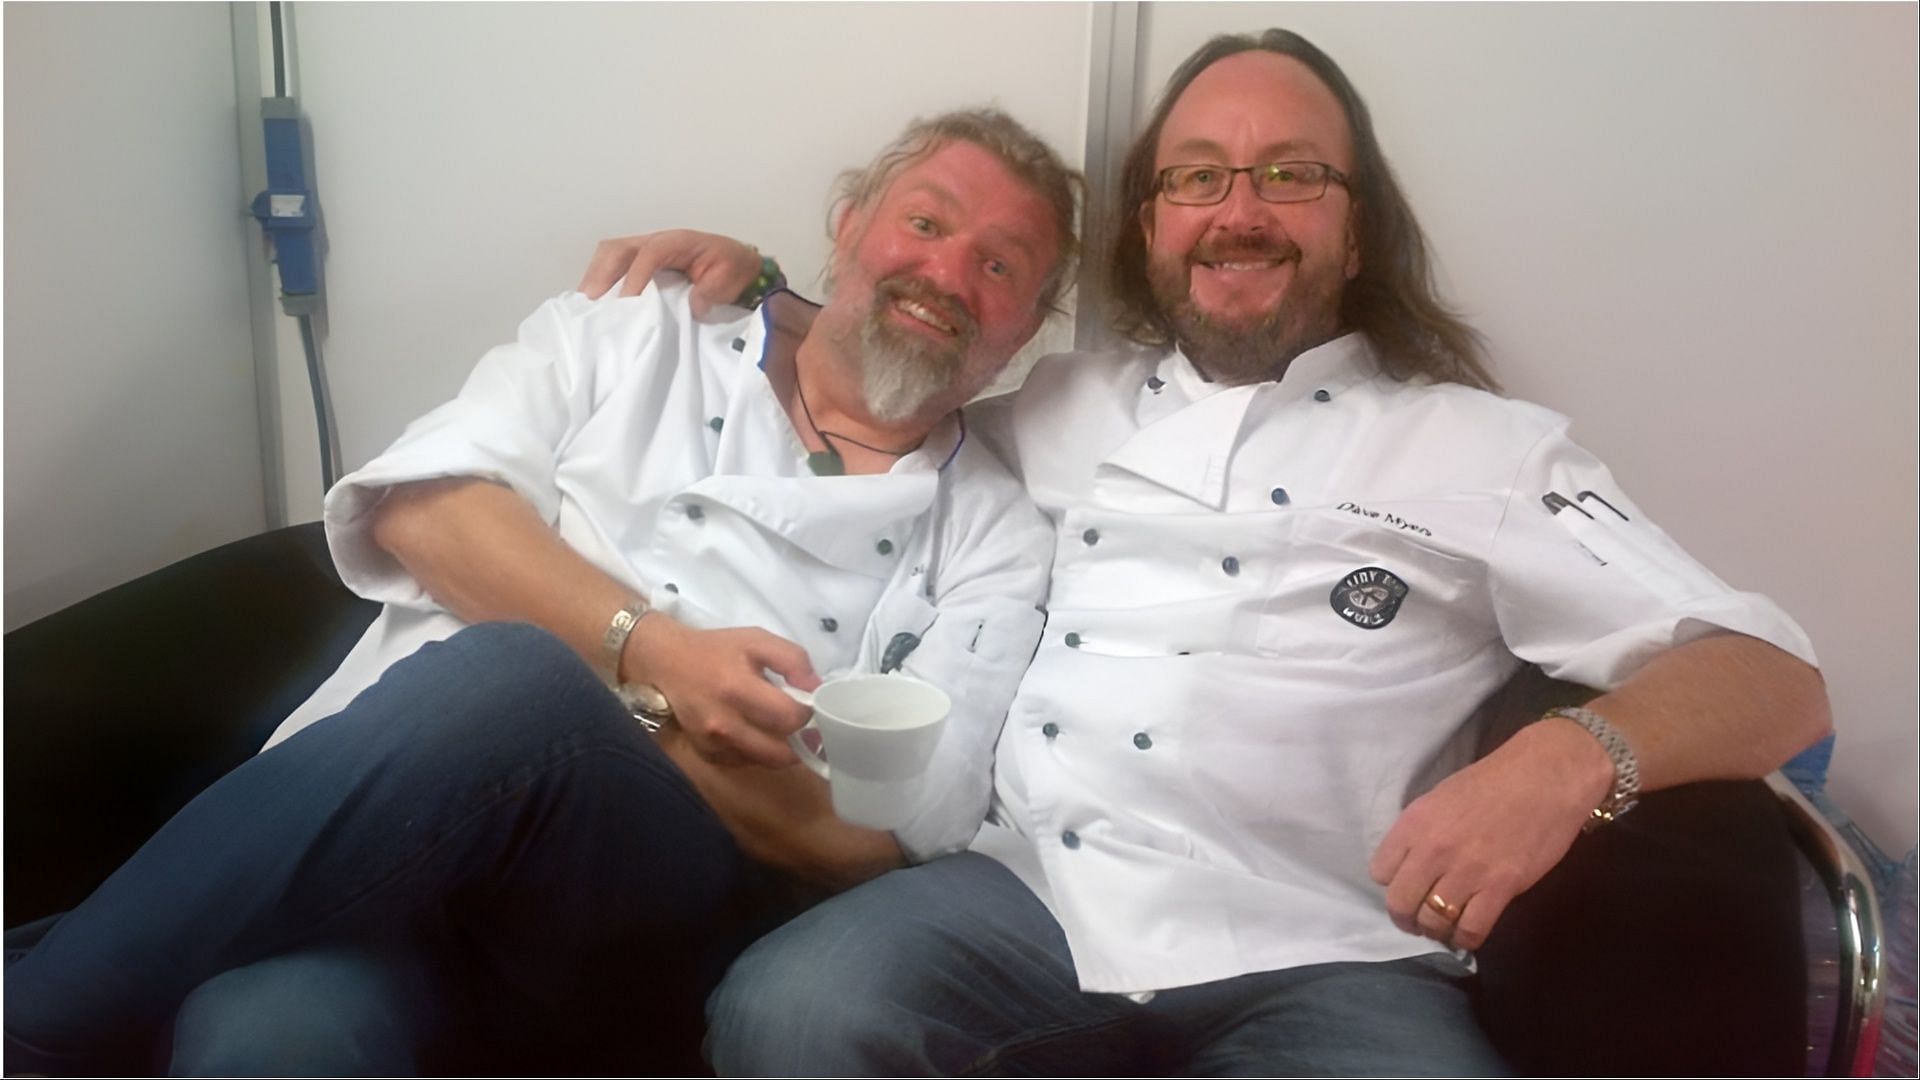 Dave Myers of The Hairy Bikers was battling with a lot of health issues (Image via The Hairy Bikers/Facebook)